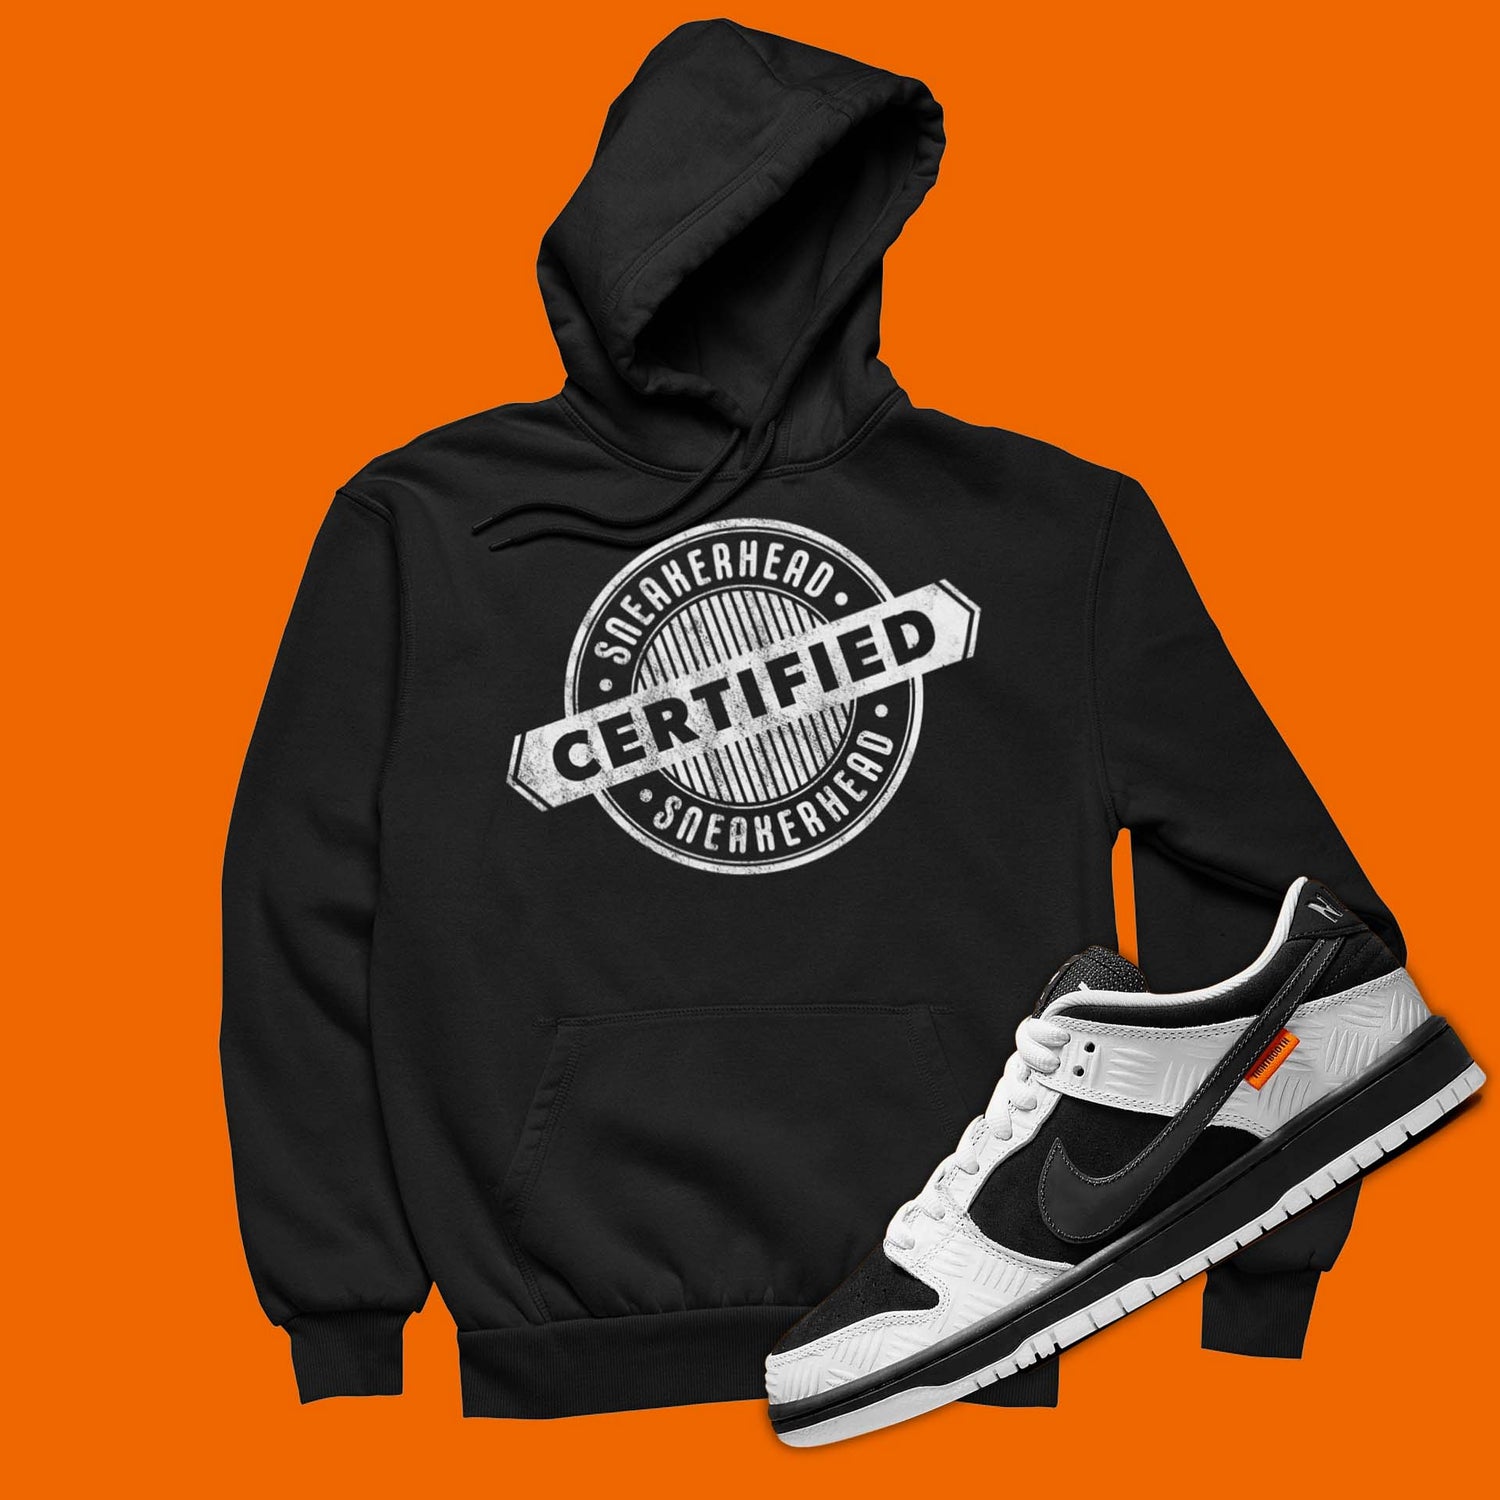 sneaker match hoodie is the perfect sweatshirt to match your Nike TIGHTBOOTH SB Dunk Low